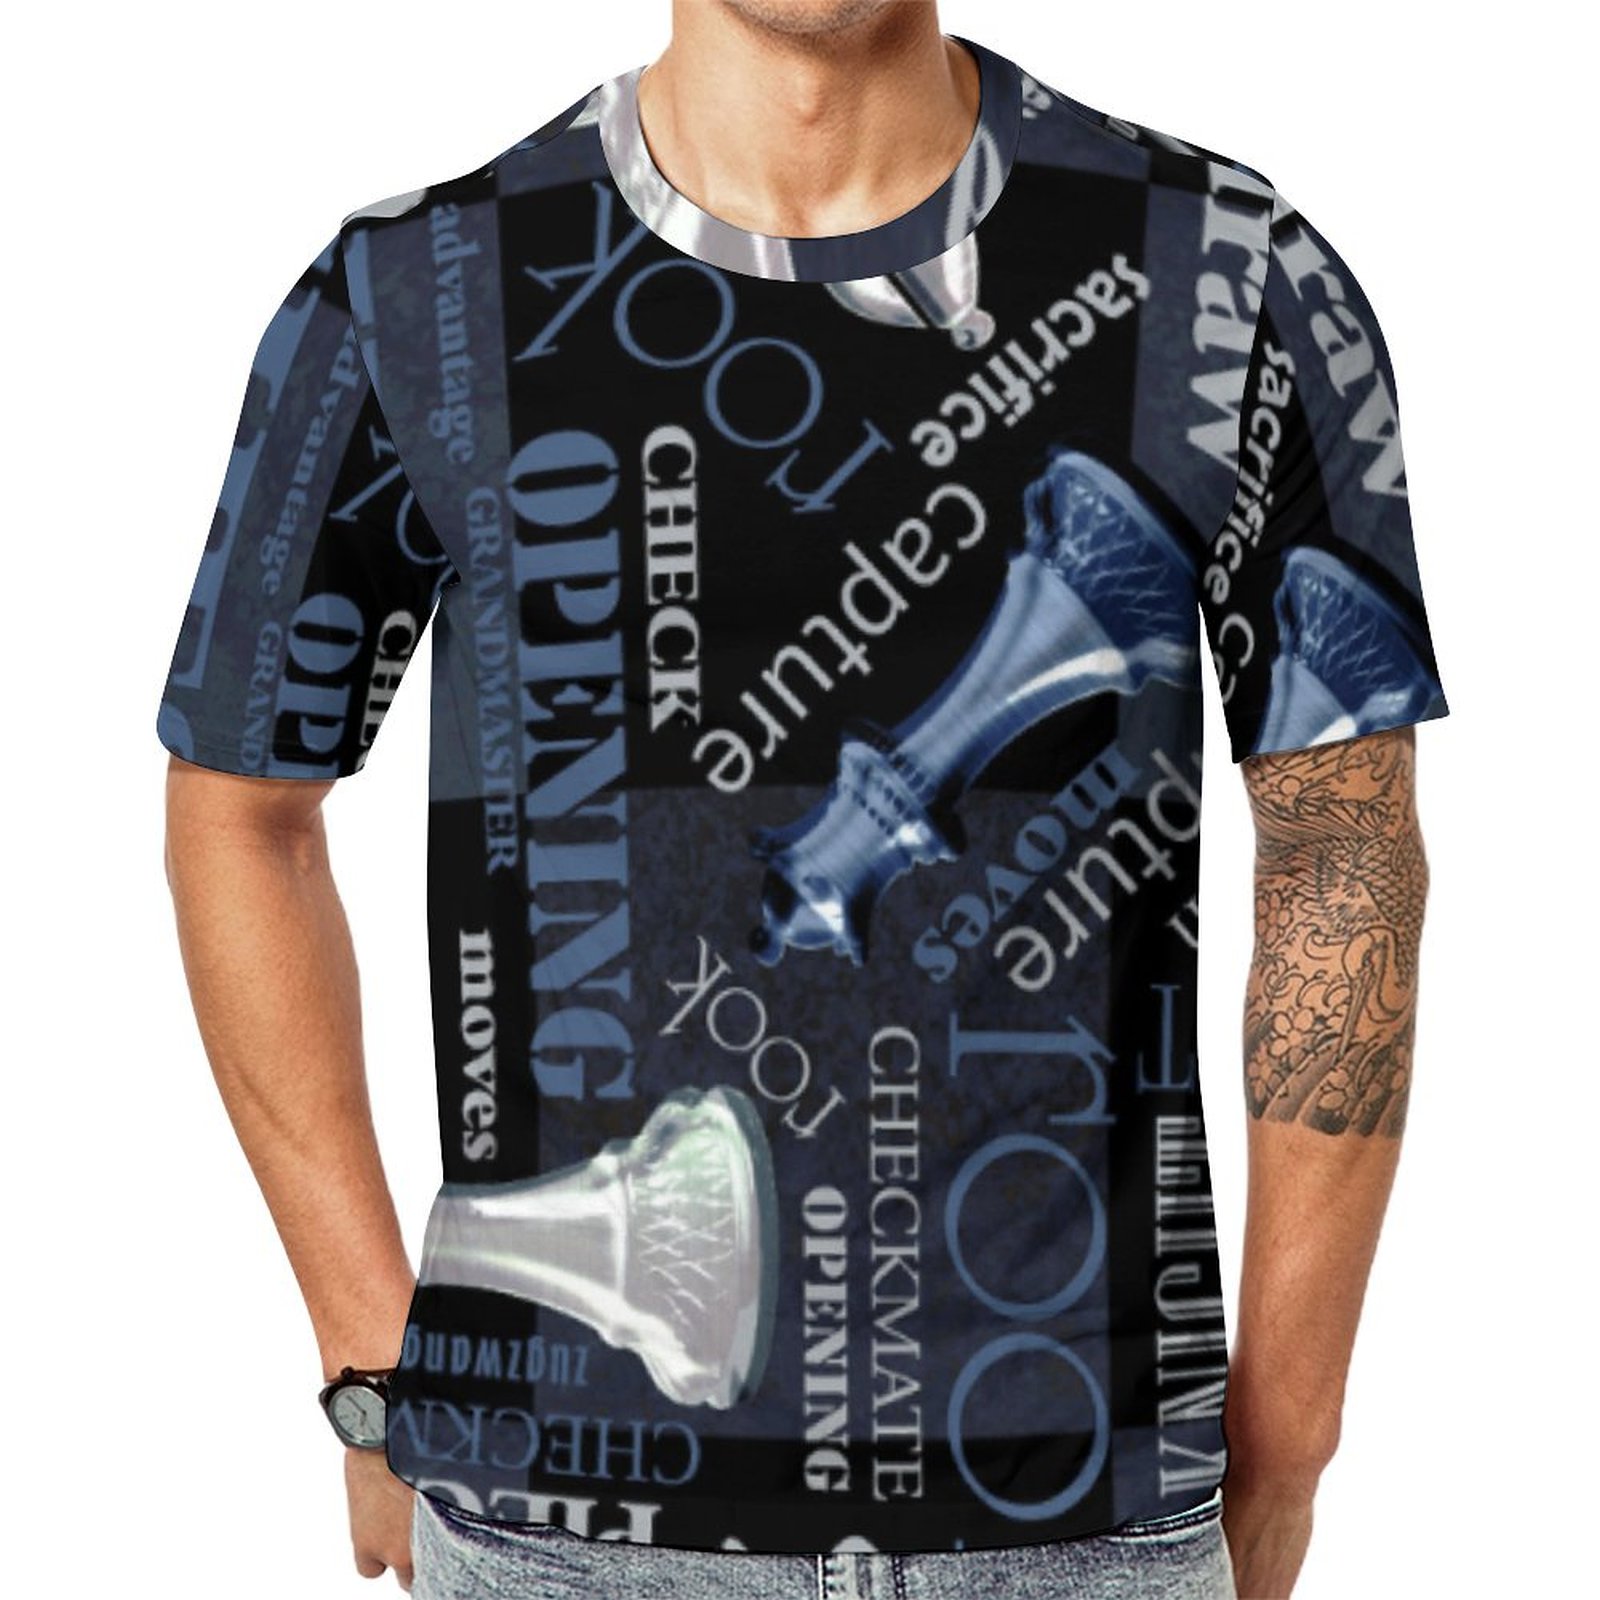 Chess Terms And Pieces Silver And Blue Short Sleeve Print Unisex Tshirt Summer Casual Tees for Men and Women Coolcoshirts